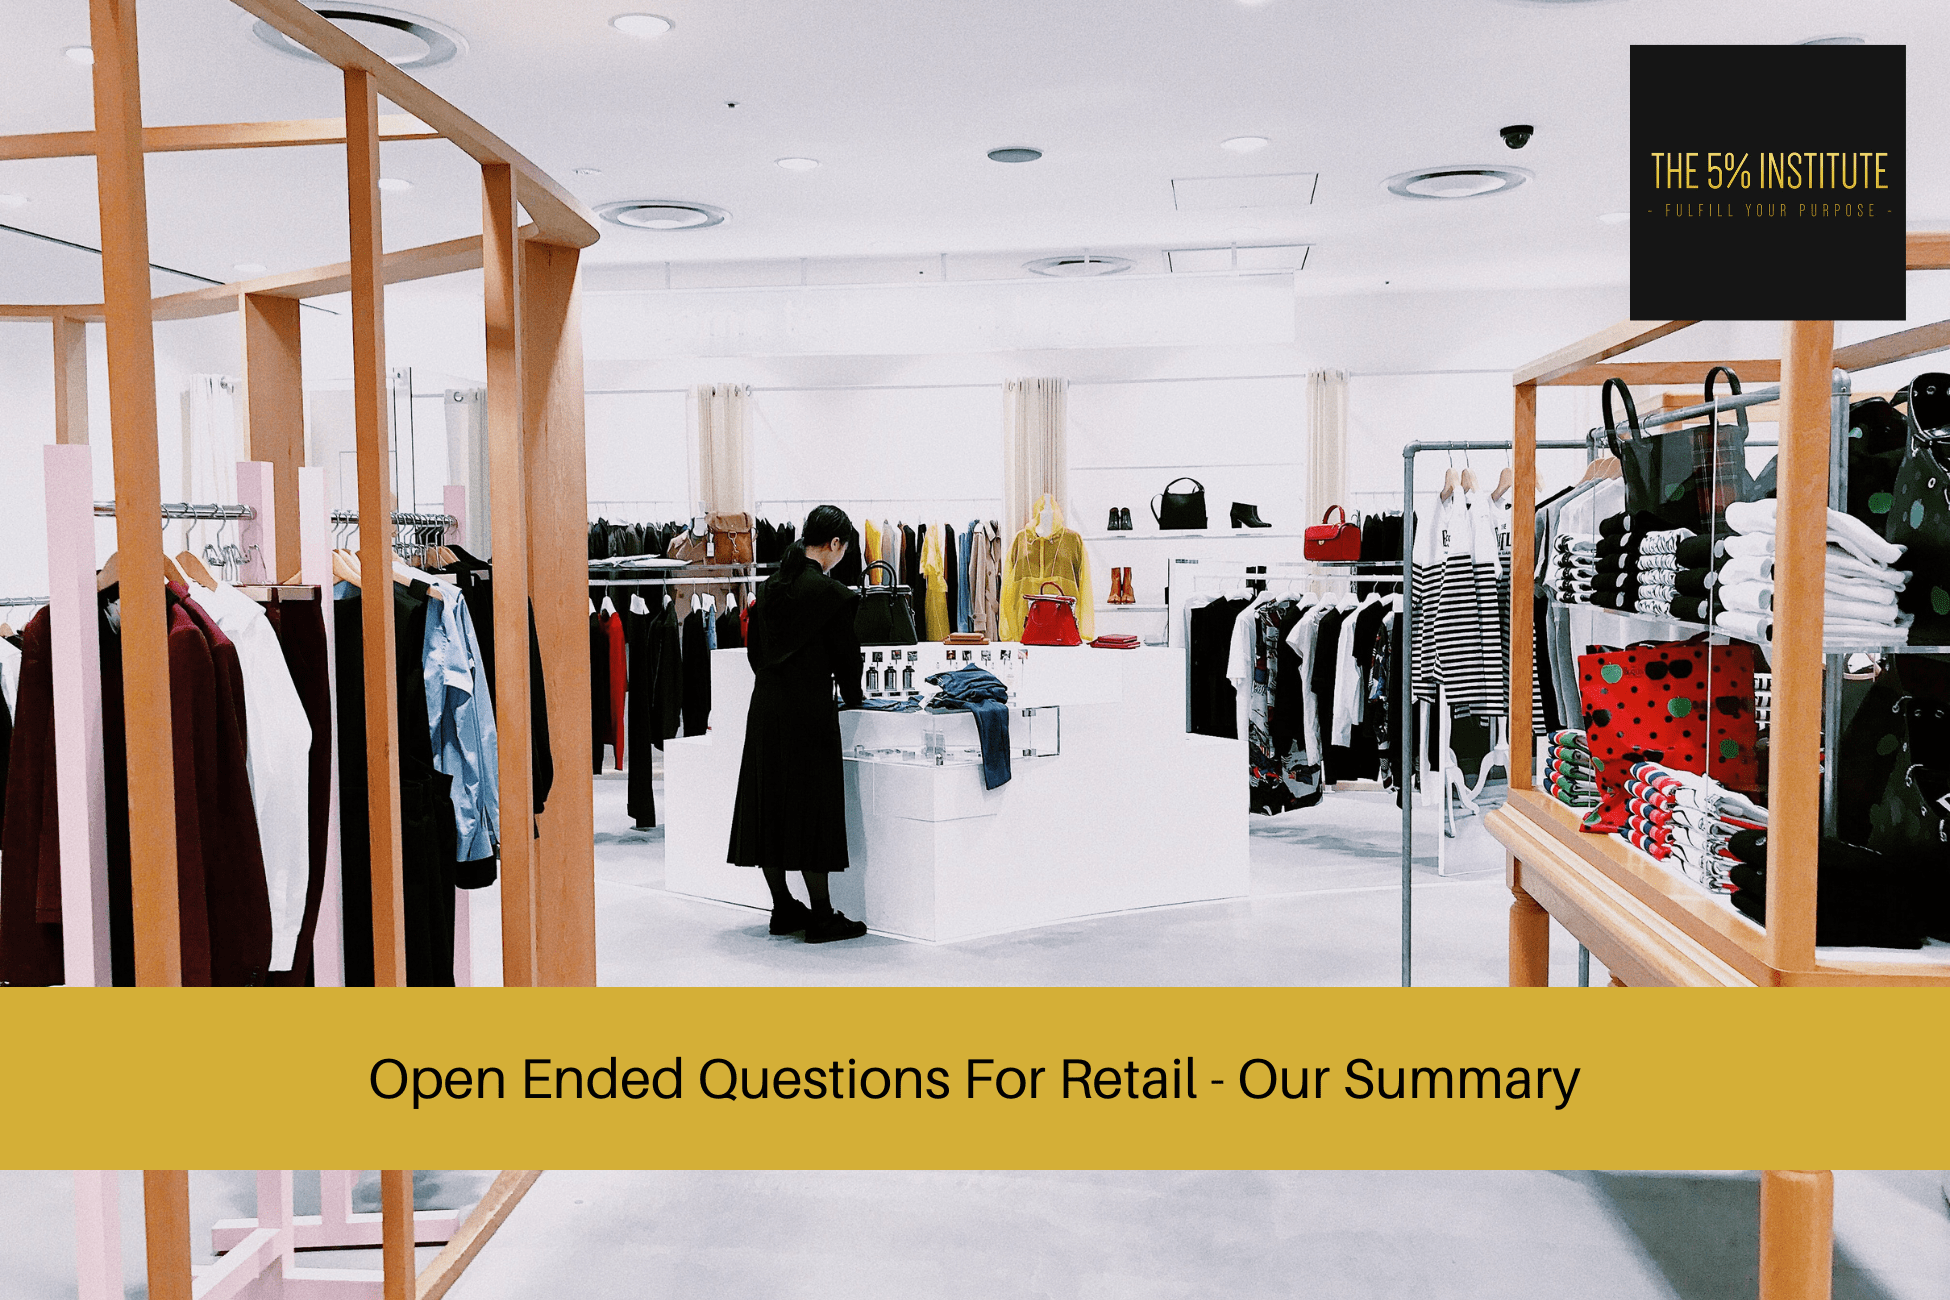 Open Ended Questions For Retail - Our Summary